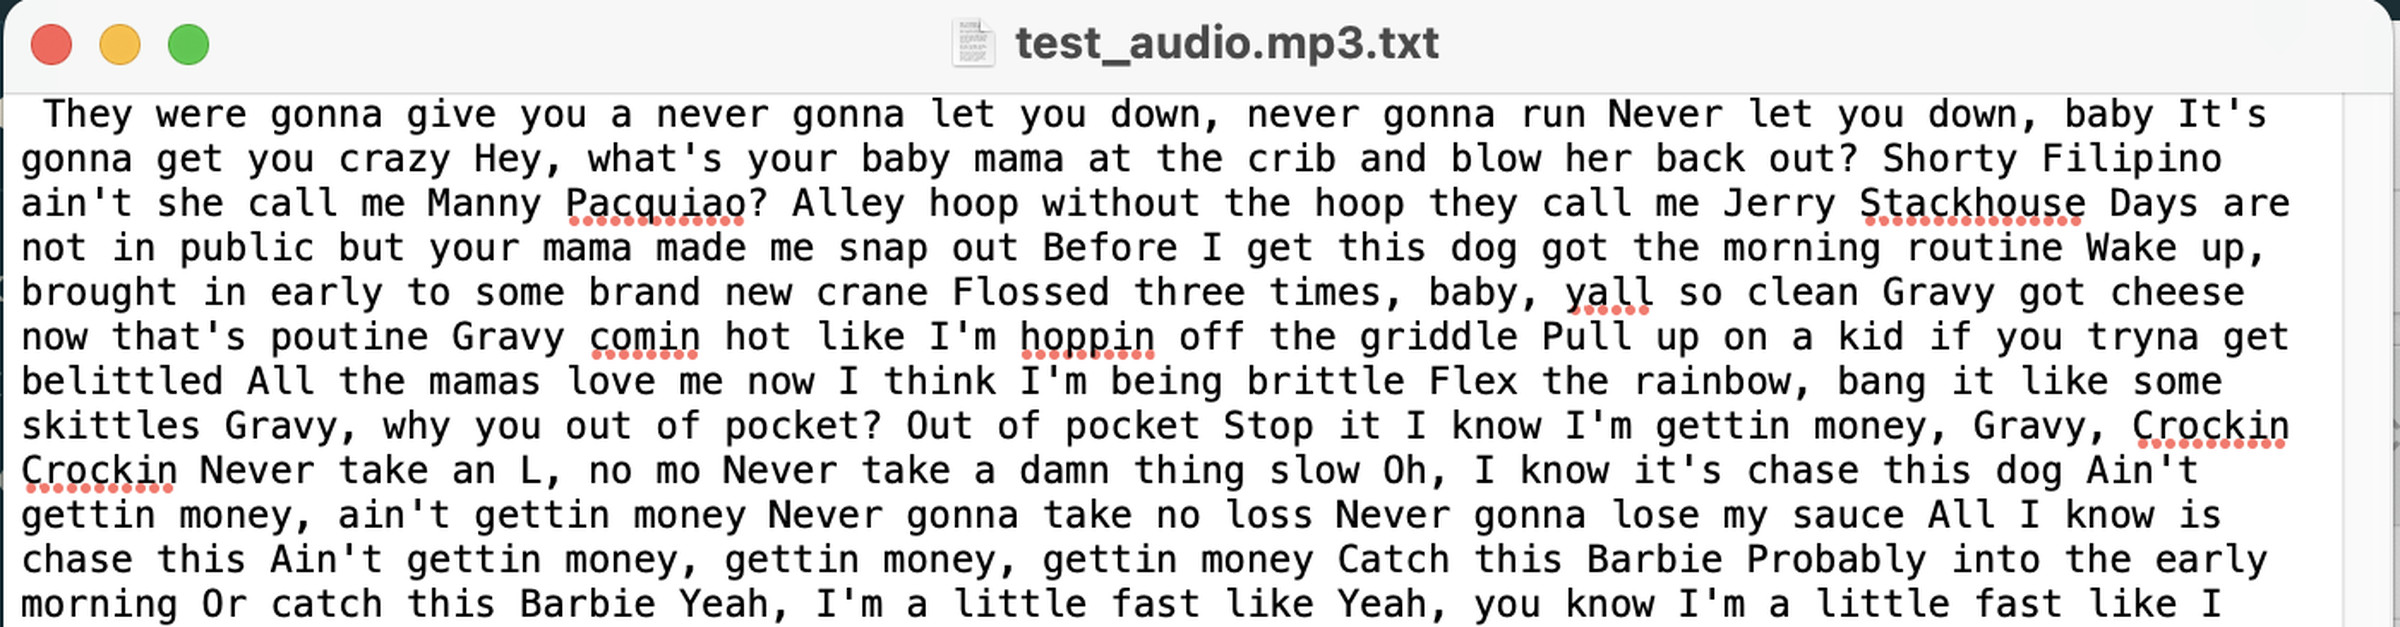 Image showing a text file with the transcribed lyrics for Yung Gravy’s song “Betty (Get Money).” The transcription contains many inaccuracies.